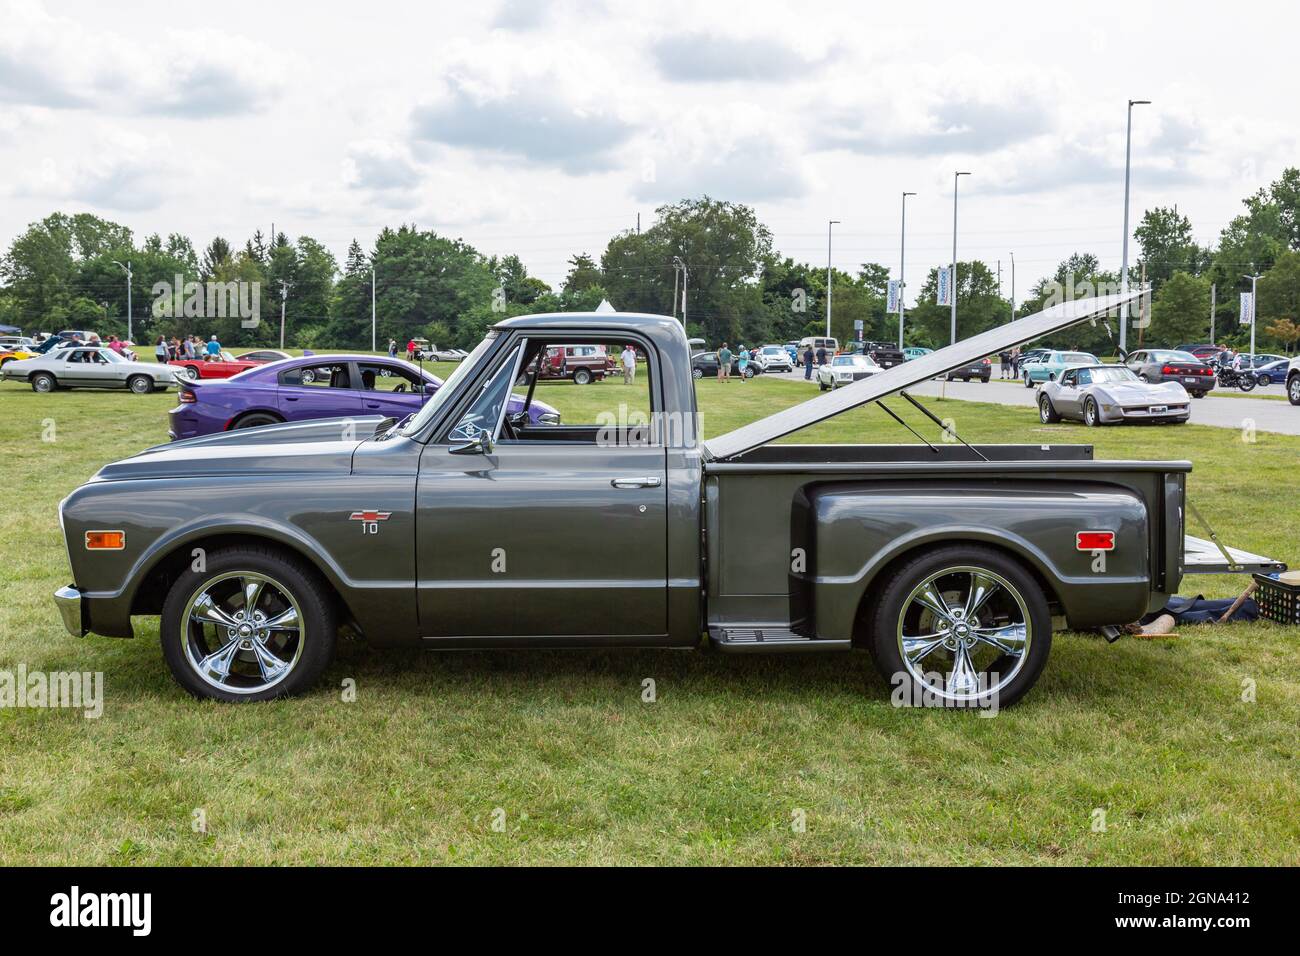 A gray 1968 Chevrolet C-10 pickup truck on display at a car show in Fort Wayne, Indiana, USA. Stock Photo